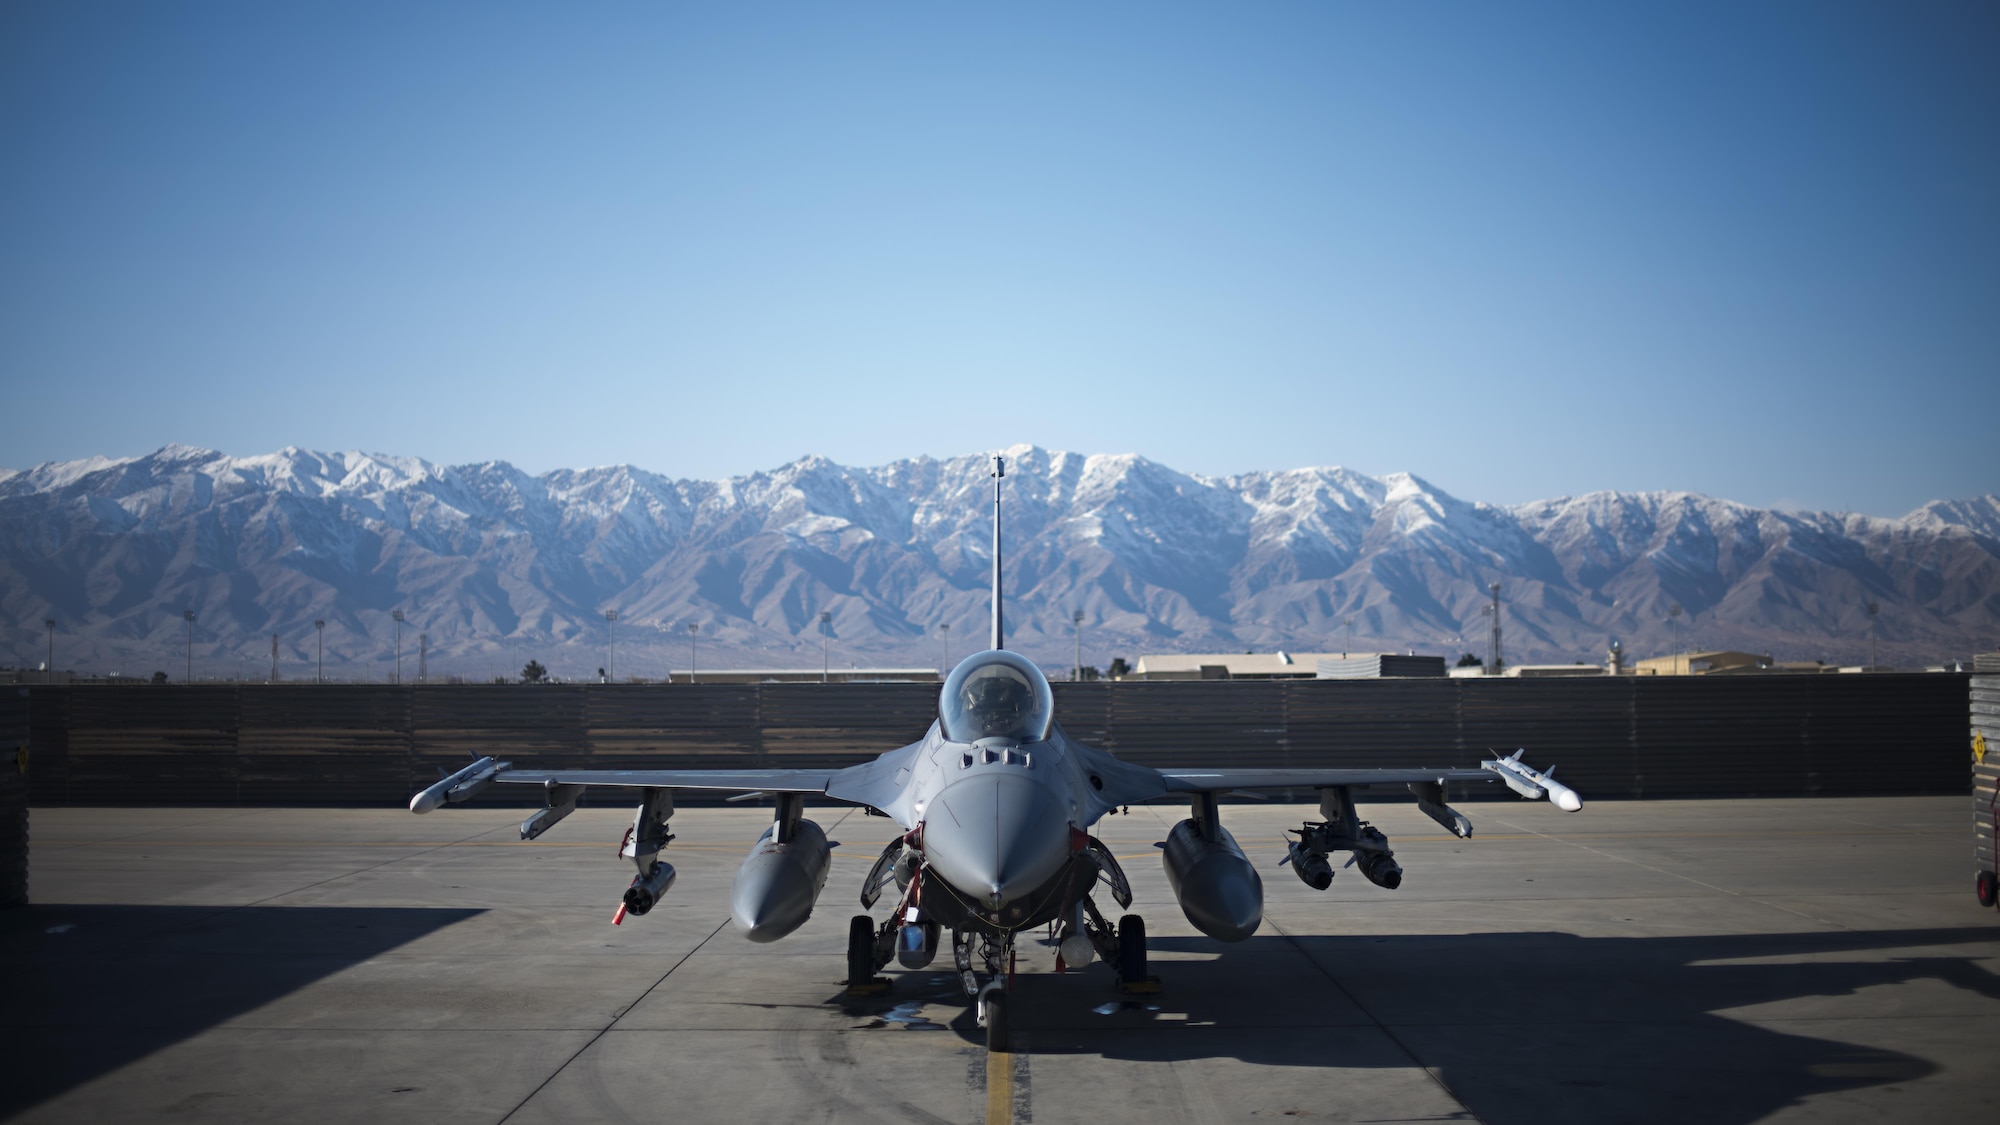 An F-16 Fighting Falcon belonging to the 79th Expeditionary Fighter Squadron out of Shaw Air Force Base, South Carolina, sits on the ramp after returning from a mission at Bagram Airfield, Afghanistan, Jan. 6, 2017. The 79th EFS at Bagram provides counterterrorism to enable a successful train, advise, assist campaign. (U.S. Air Force photo by Staff Sgt. Katherine Spessa)